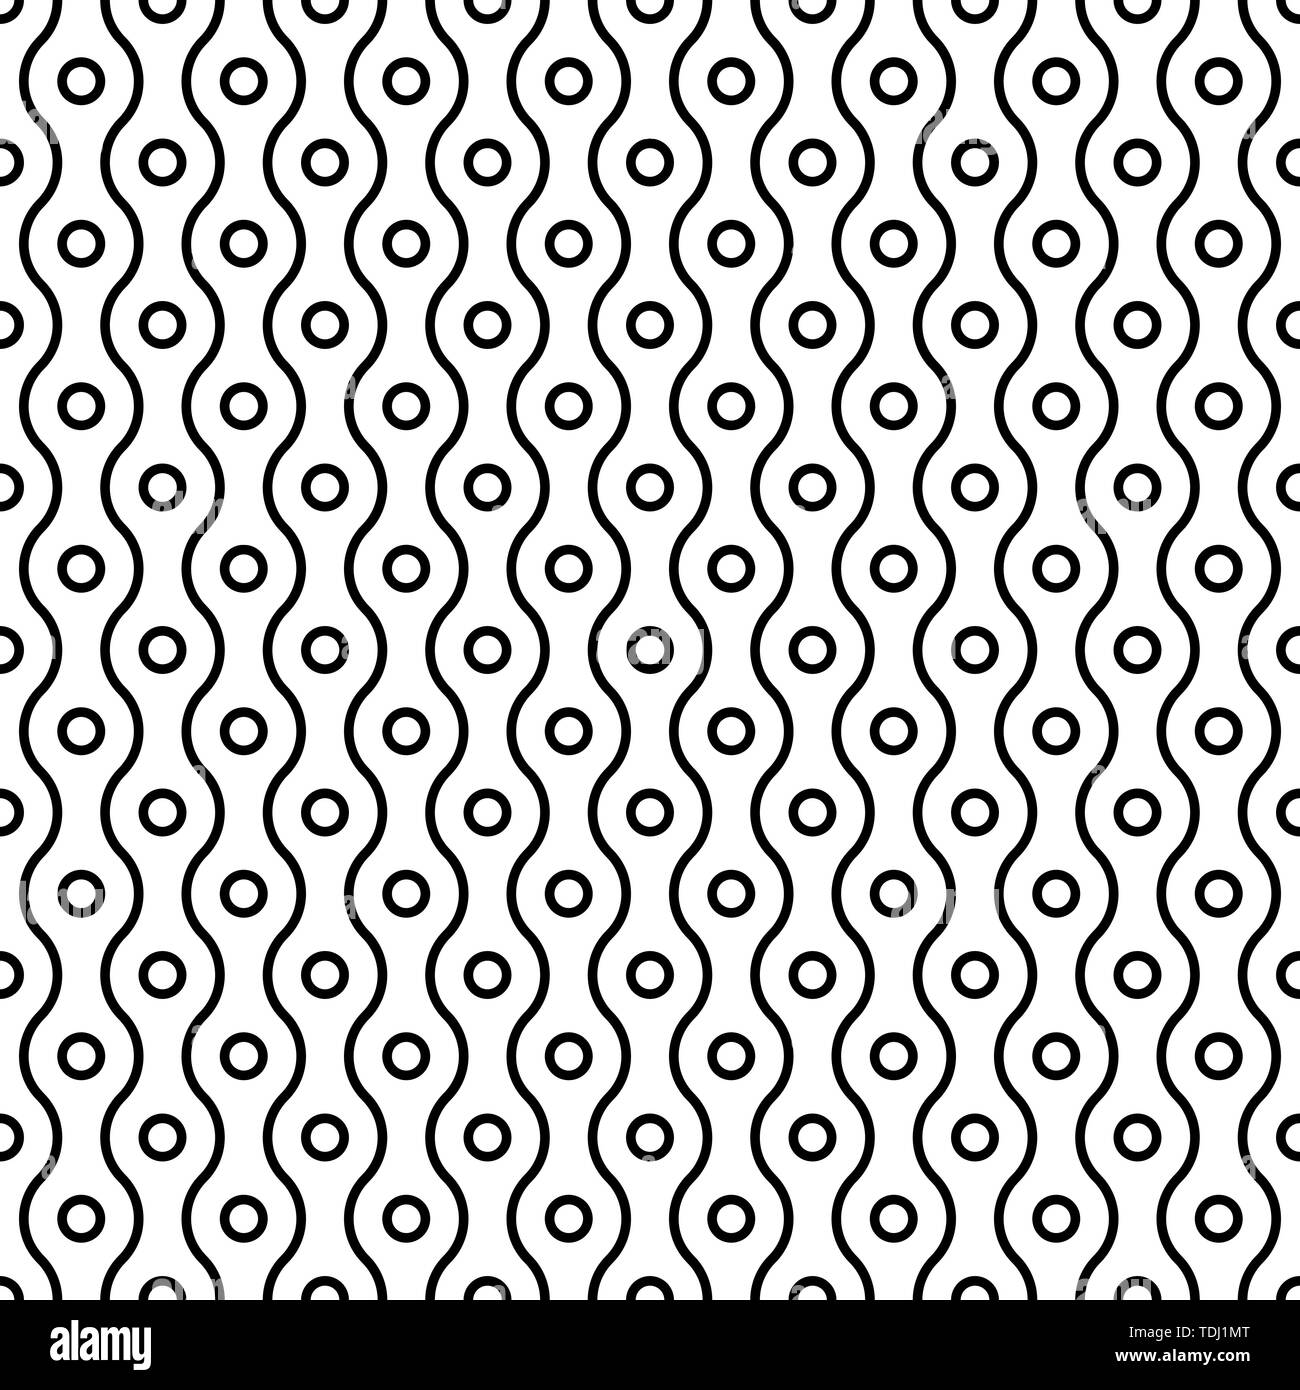 Seamless small circles and wavy linear grid Stock Vector